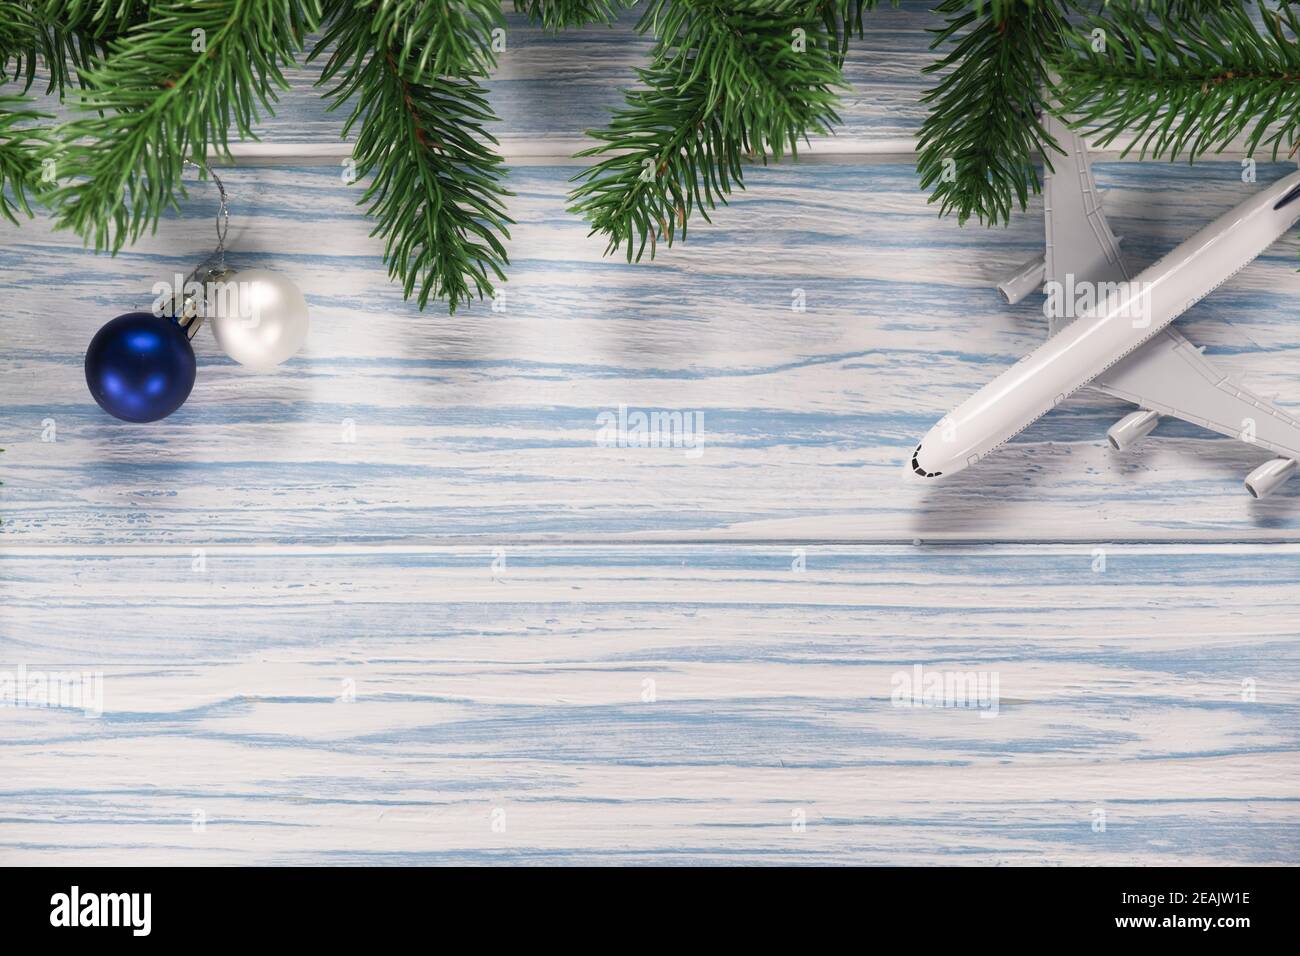 Christmas or New Year background with fir branches and plane model. Holiday travel concept. Stock Photo